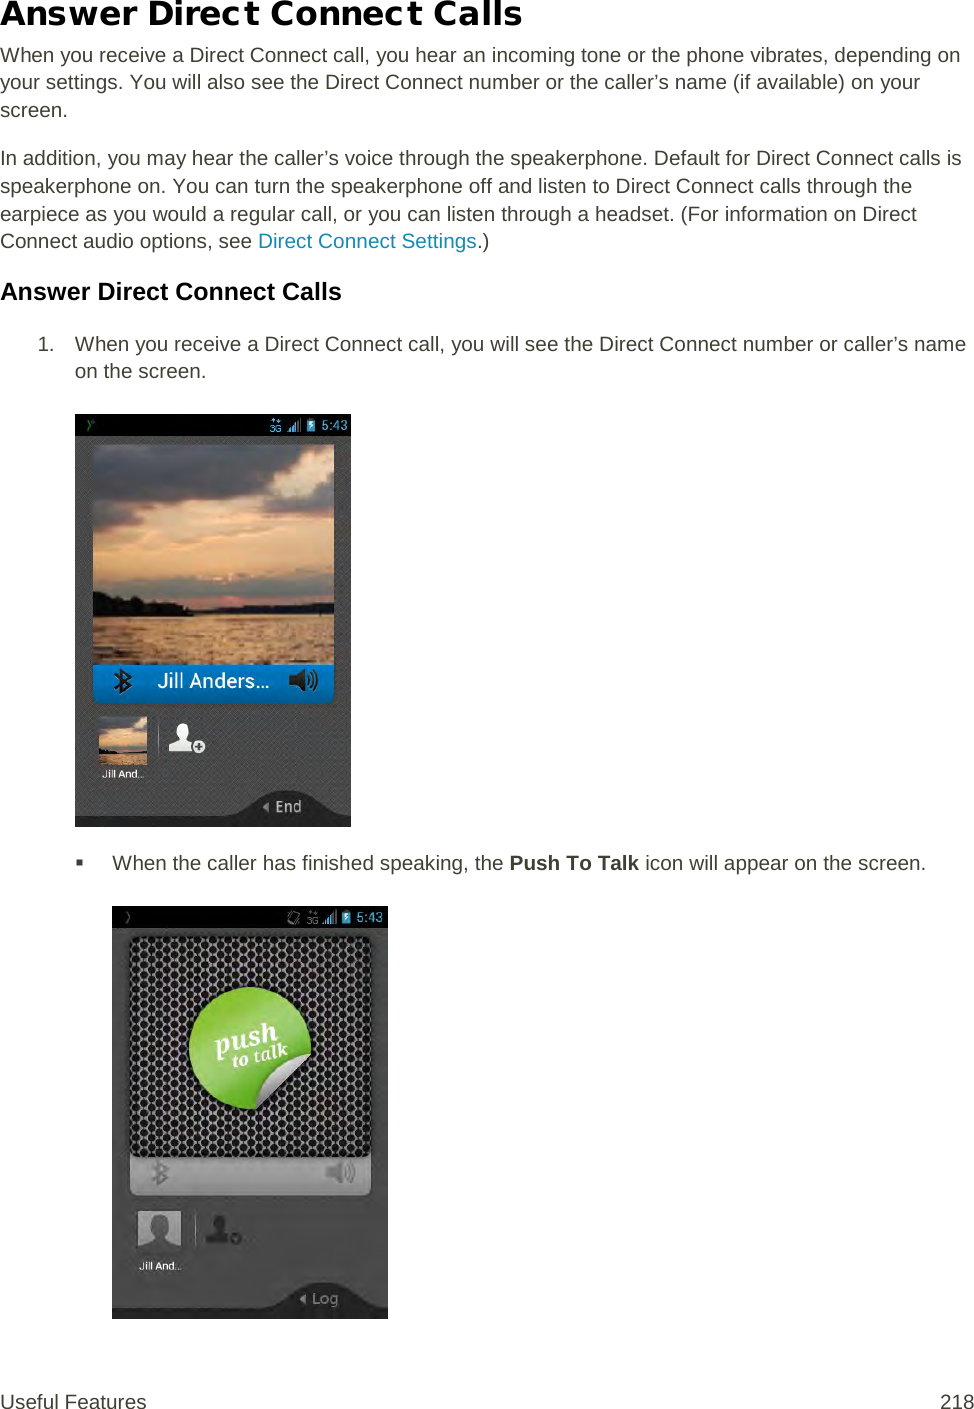 Answer Direct Connect Calls When you receive a Direct Connect call, you hear an incoming tone or the phone vibrates, depending on your settings. You will also see the Direct Connect number or the caller’s name (if available) on your screen.  In addition, you may hear the caller’s voice through the speakerphone. Default for Direct Connect calls is speakerphone on. You can turn the speakerphone off and listen to Direct Connect calls through the earpiece as you would a regular call, or you can listen through a headset. (For information on Direct Connect audio options, see Direct Connect Settings.) Answer Direct Connect Calls 1. When you receive a Direct Connect call, you will see the Direct Connect number or caller’s name on the screen.      When the caller has finished speaking, the Push To Talk icon will appear on the screen.   Useful Features 218   